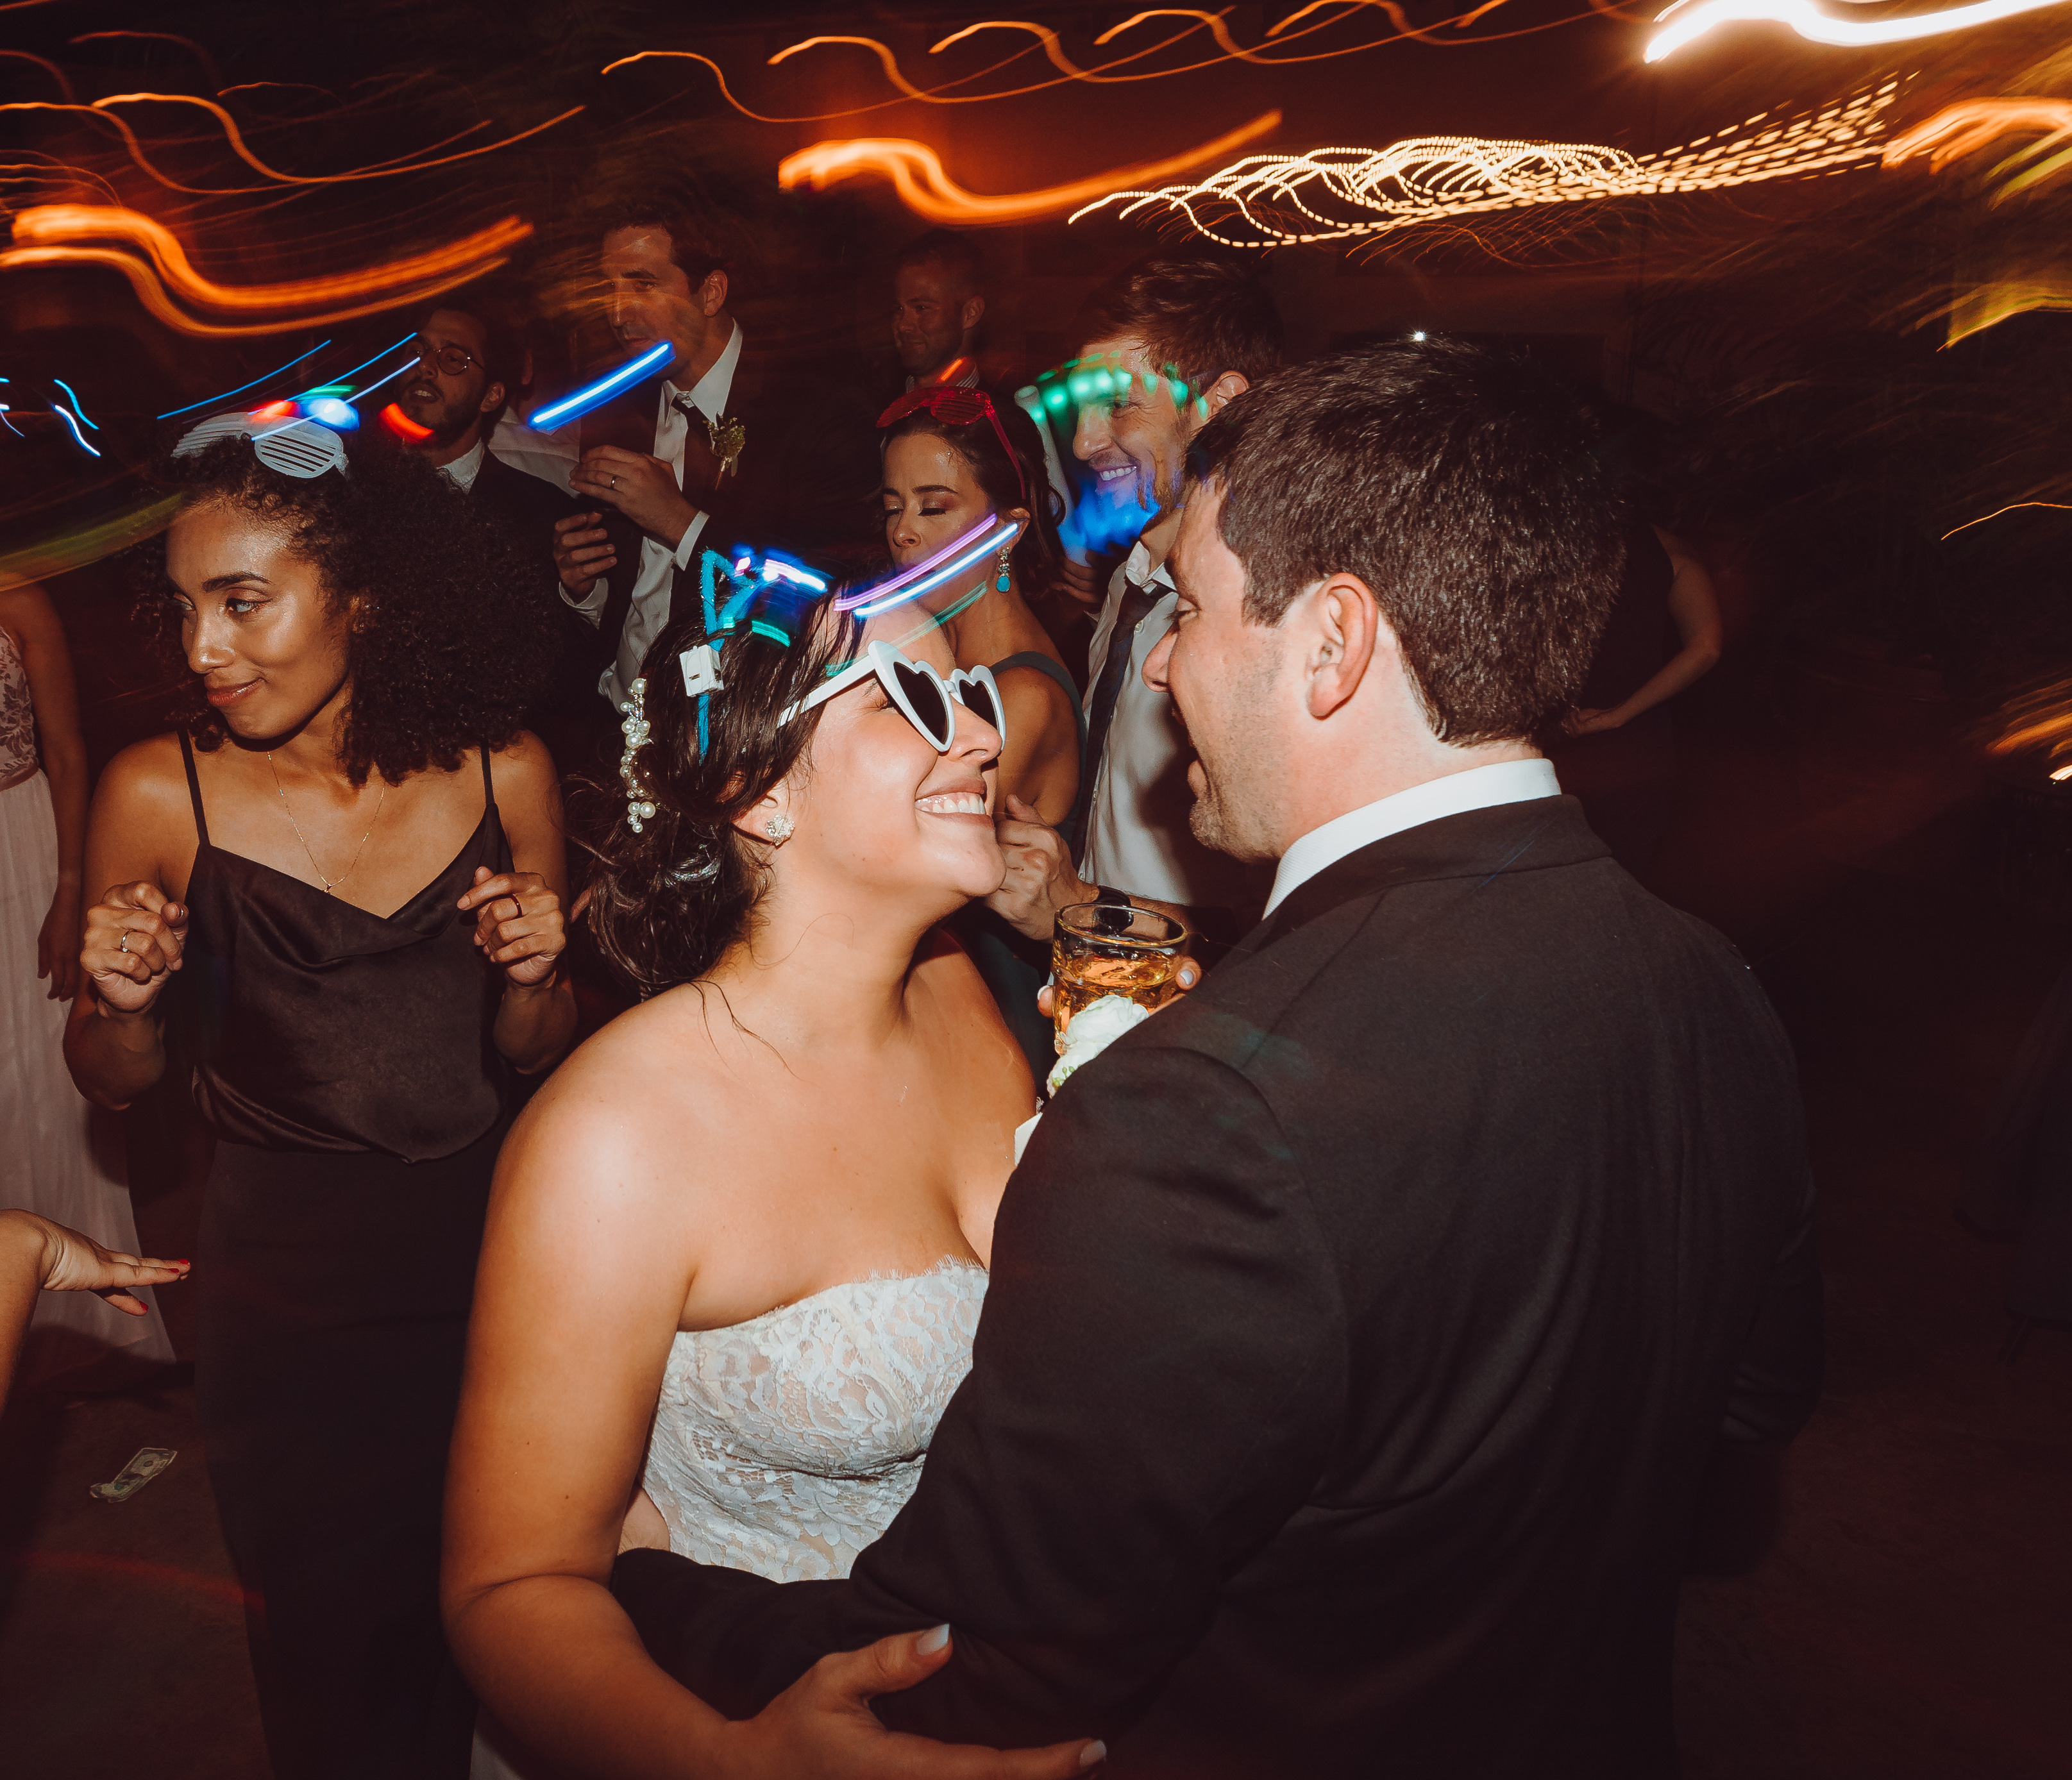 A bride and groom dance at their wedding reception in Houston. The bride wears heart shaped sunglasses and smiles at her groom.